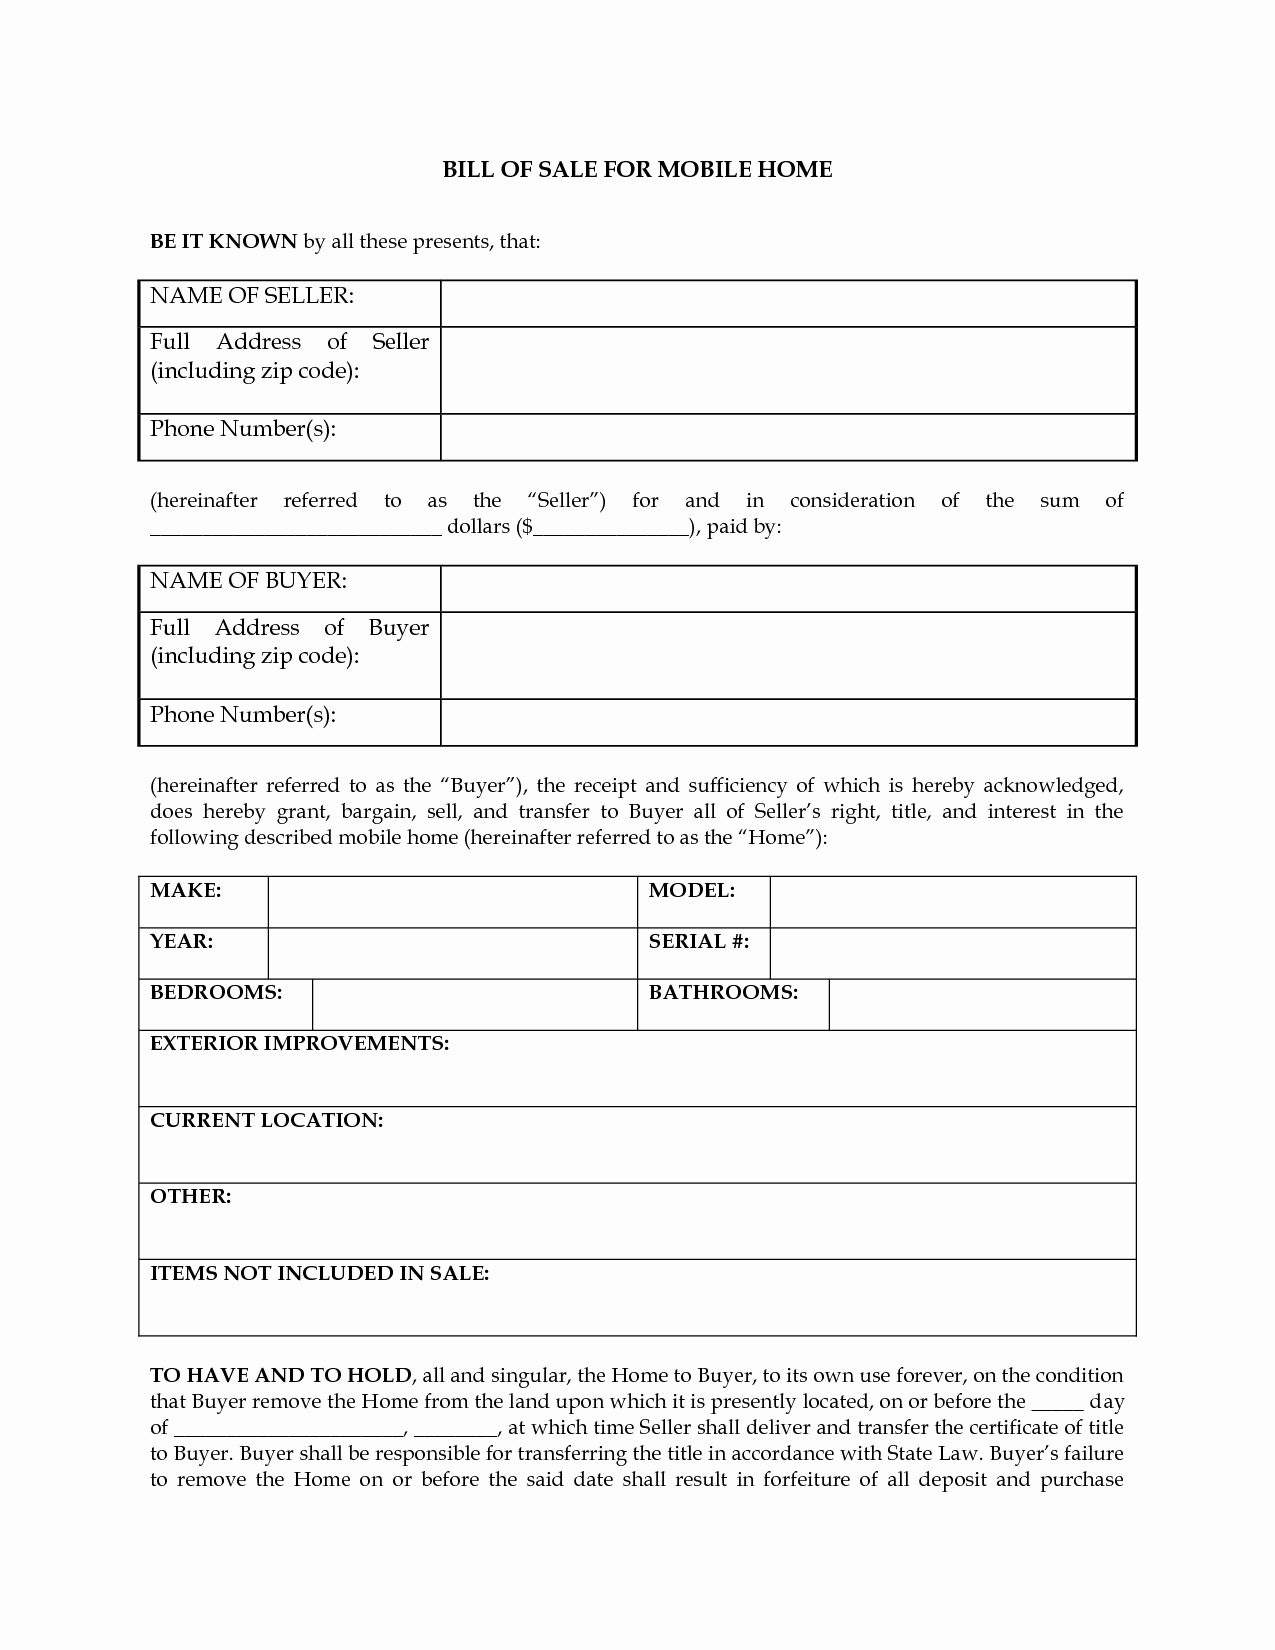 Bill Of Sale Printable Version Awesome Free Printable Rv Bill Sale form Generic form Mughals